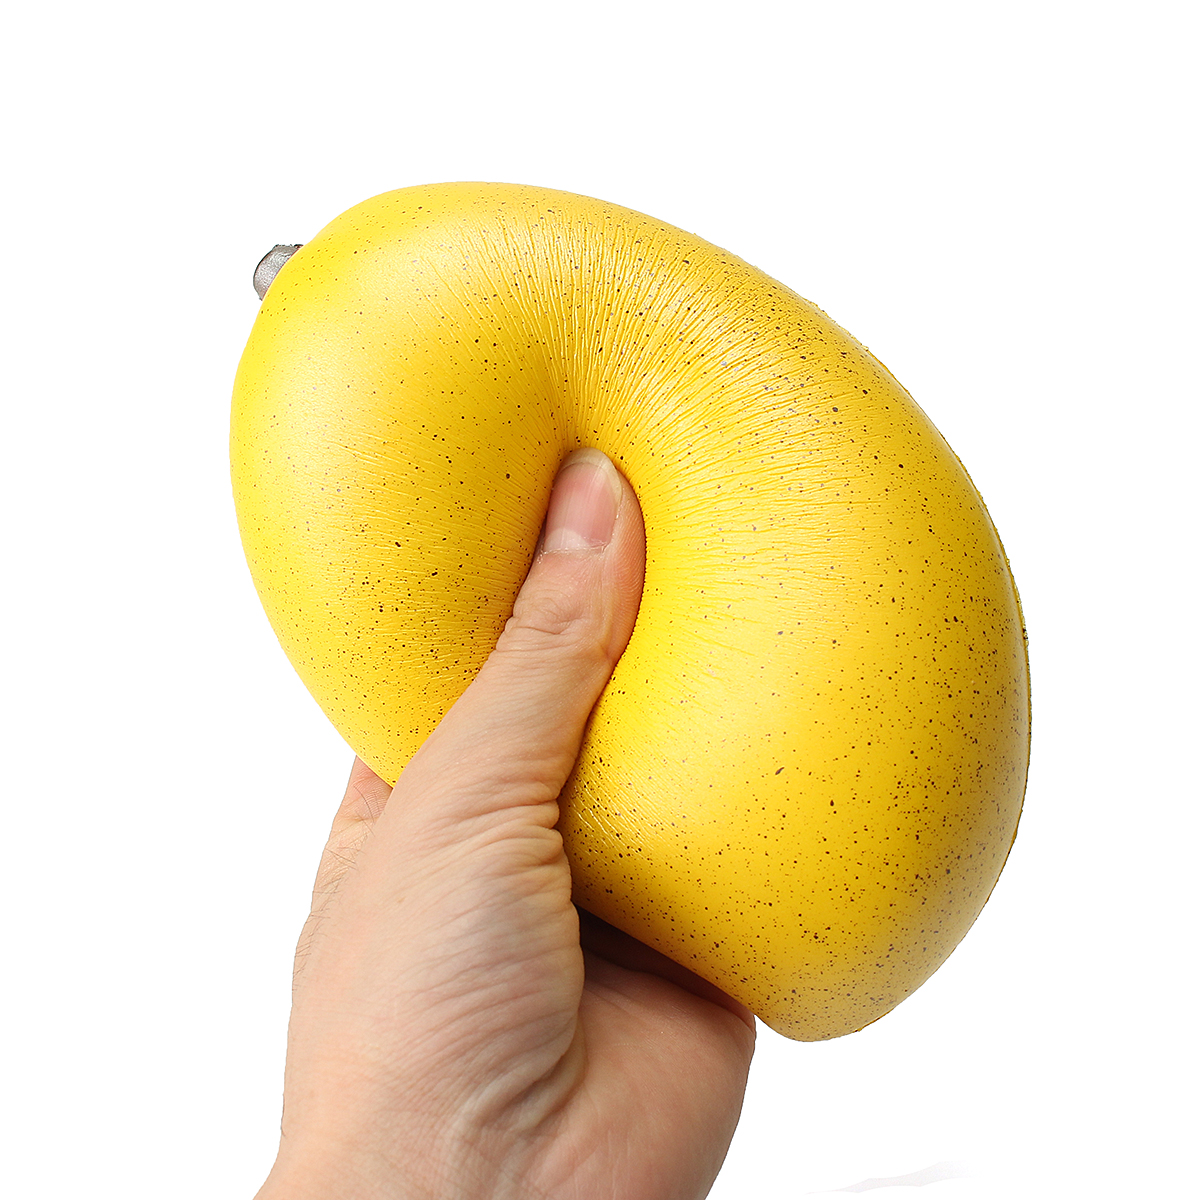 

18CM Colossal Kawaii Cute Jumbo Squishy Cream Stress Scented Slow Rising Mango Toy for Cellphone